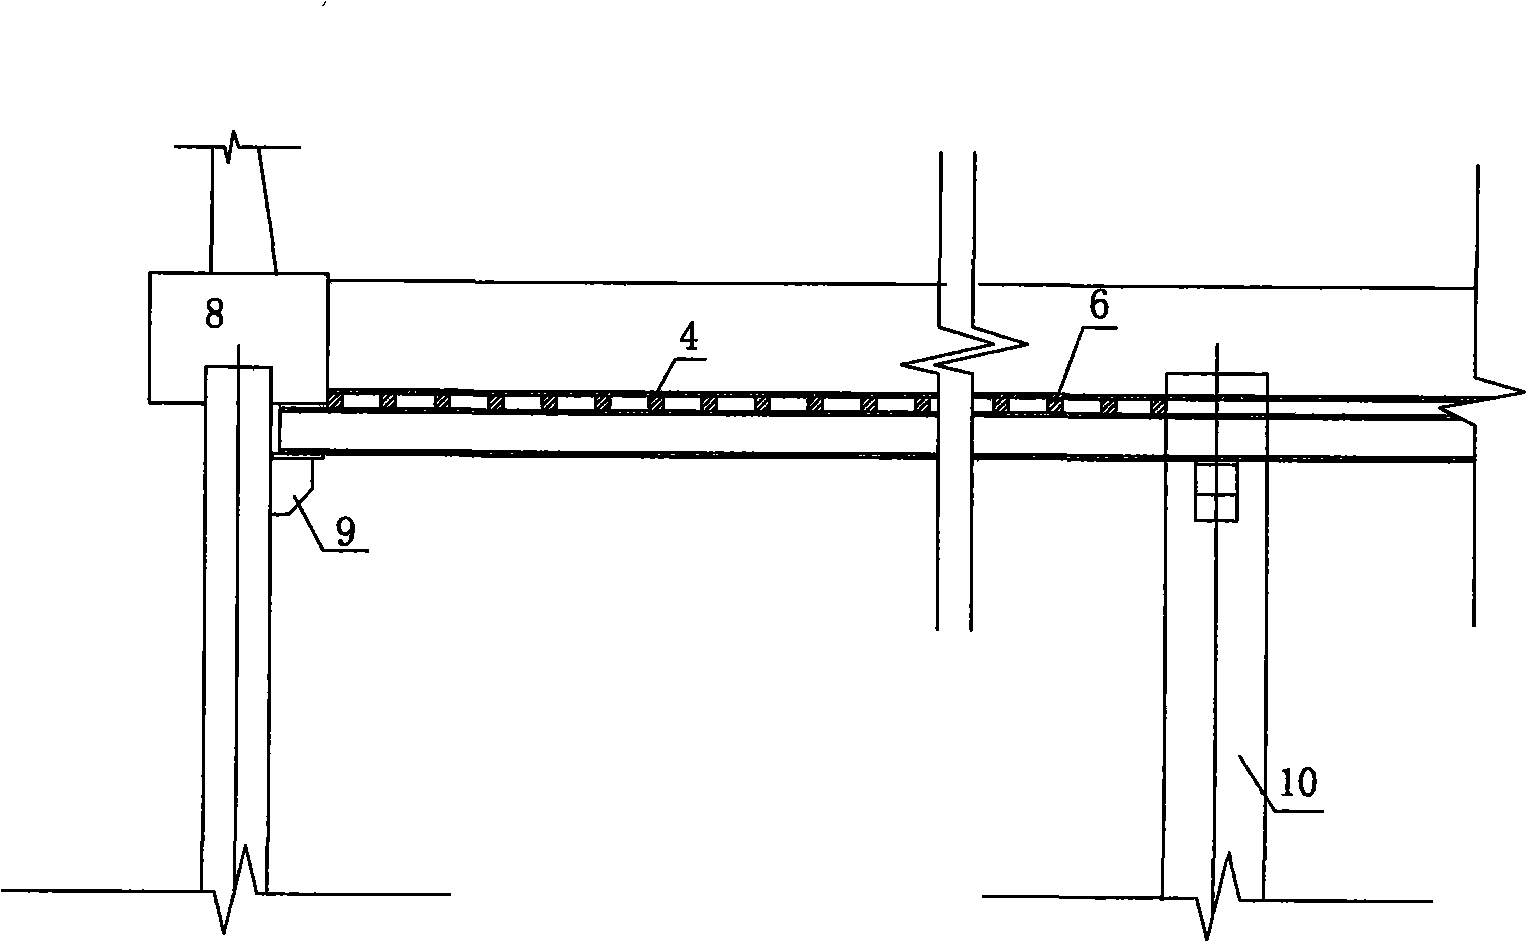 Foundation ditch construction method in water for supporting circuit purlin